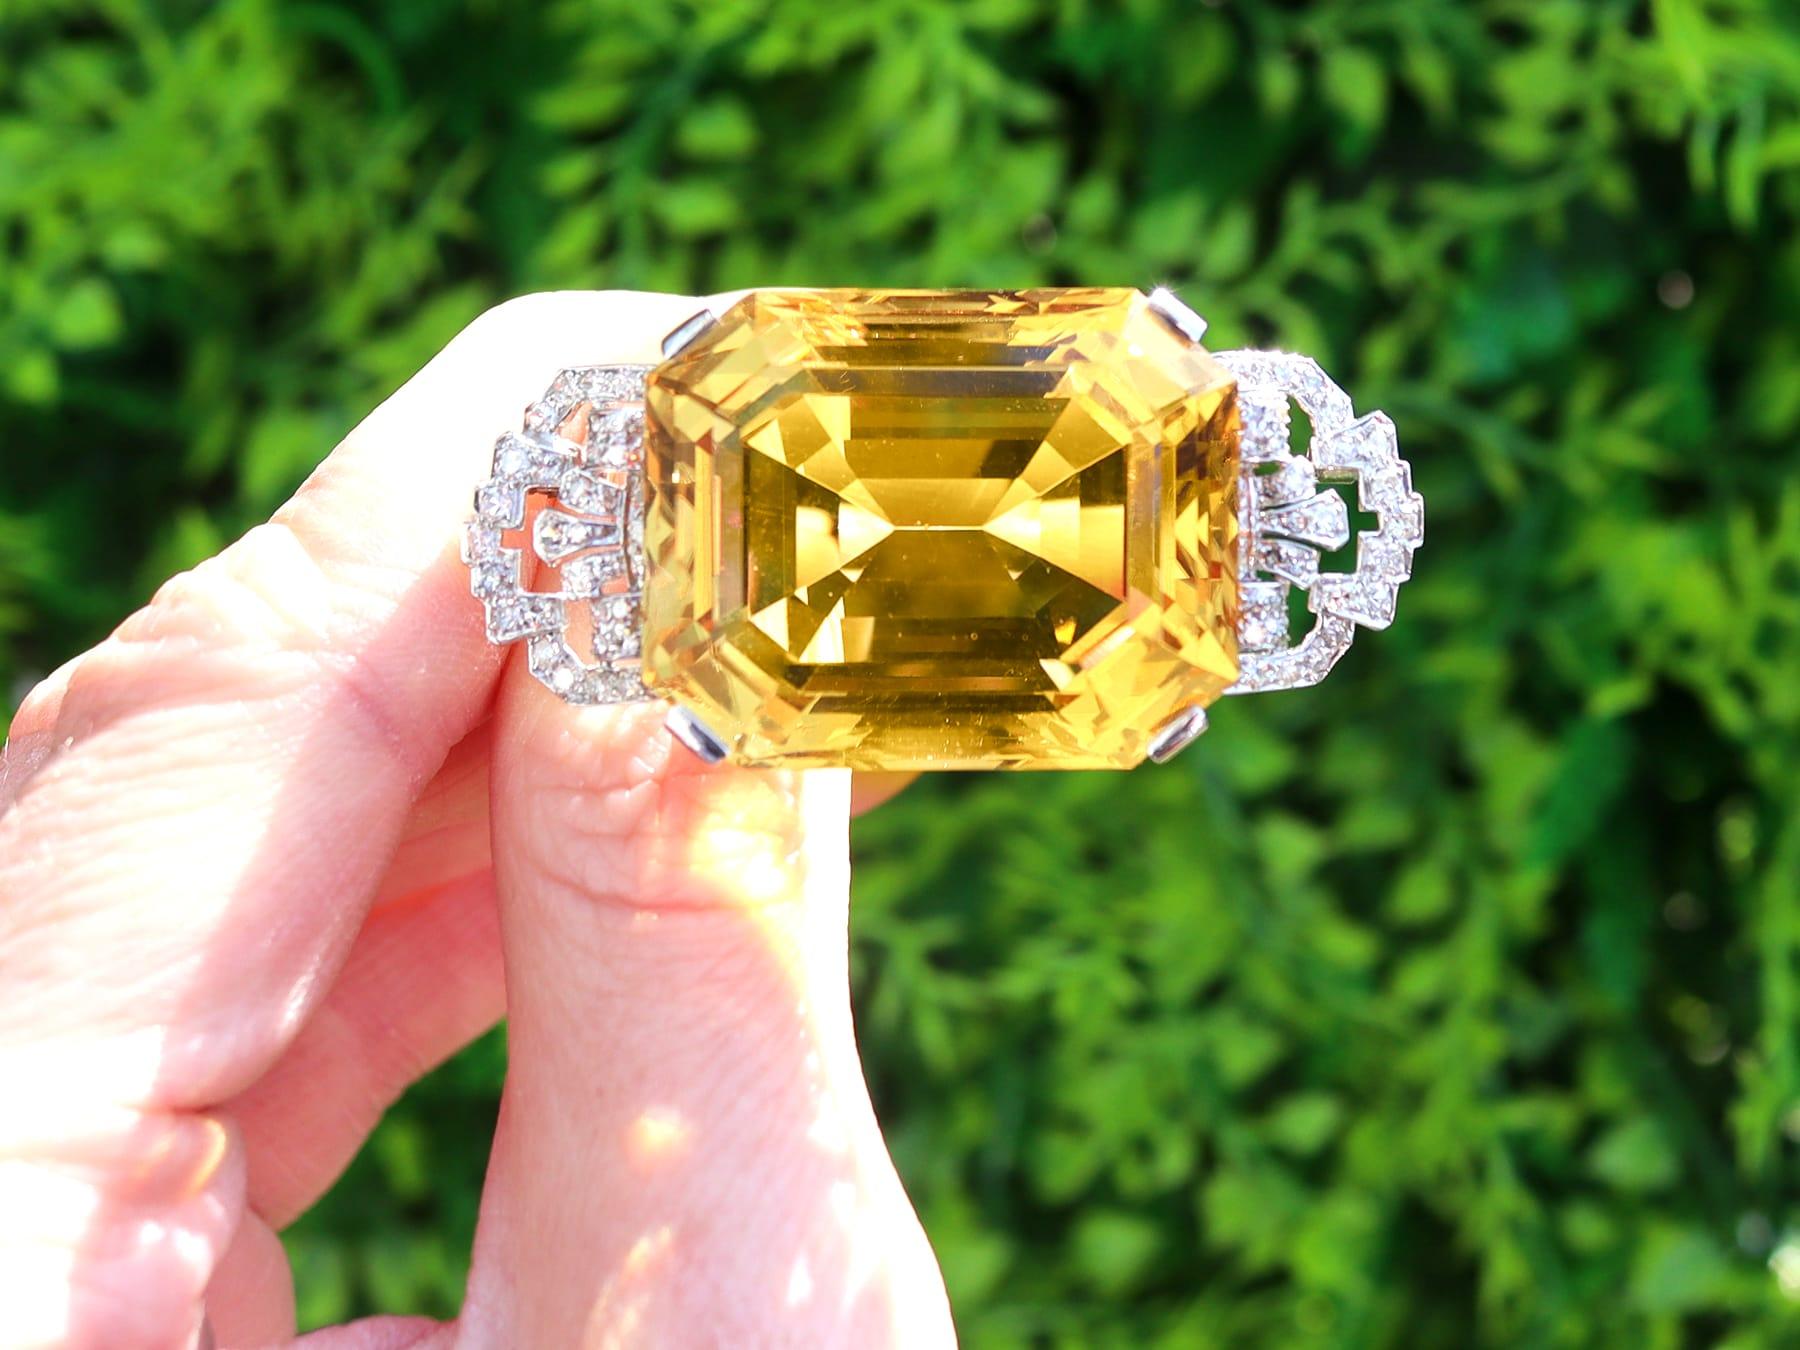 A stunning, fine and impressive antique 1930's 77.42 carat citrine and 1.16 carat diamond, platinum and white gold set Art Deco brooch; part of our diverse antique jewelry collections.

This stunning, fine and impressive Art Deco brooch has been